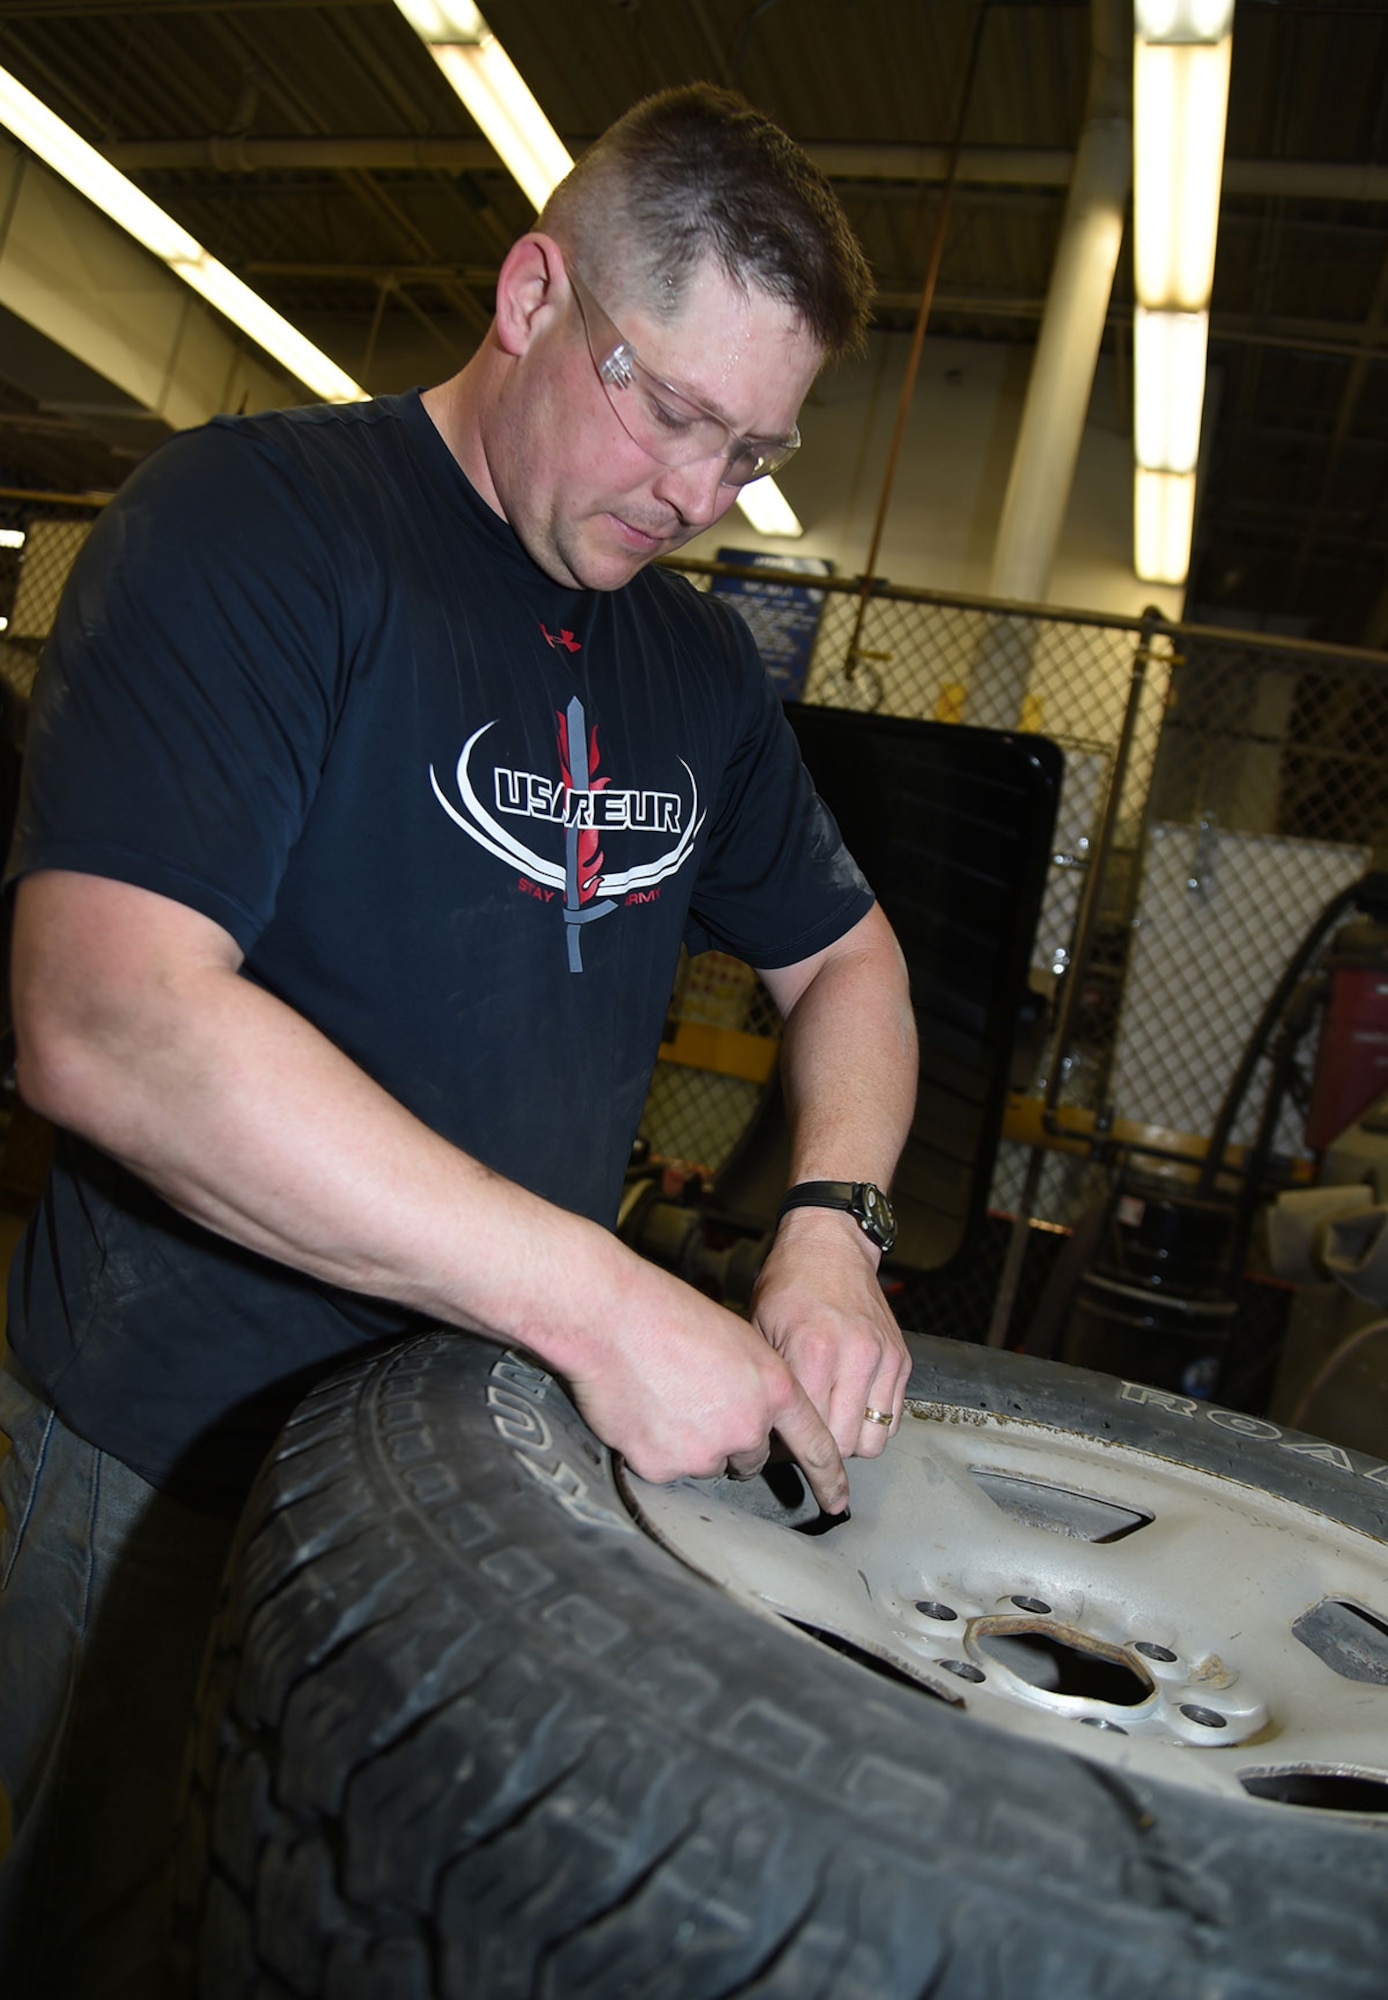 U.S. Army Sgt. Caleb Morrison, senior patrolman, mounts one of his summer tires, April 14, 2016. According to the Division of Motor Vehicles, it is unlawful to operate a motor vehicle with studded tires on a paved highway or road from May 1 through September 15. Morrison is attached to the 545th Military Police Company, 6th Brigade Engineer Battalion (Airborne), 4th Infantry Brigade Combat Team (Airborne), 25th Infantry Division. (U.S. Air Force photo by Staff Sgt. Sheila deVera)